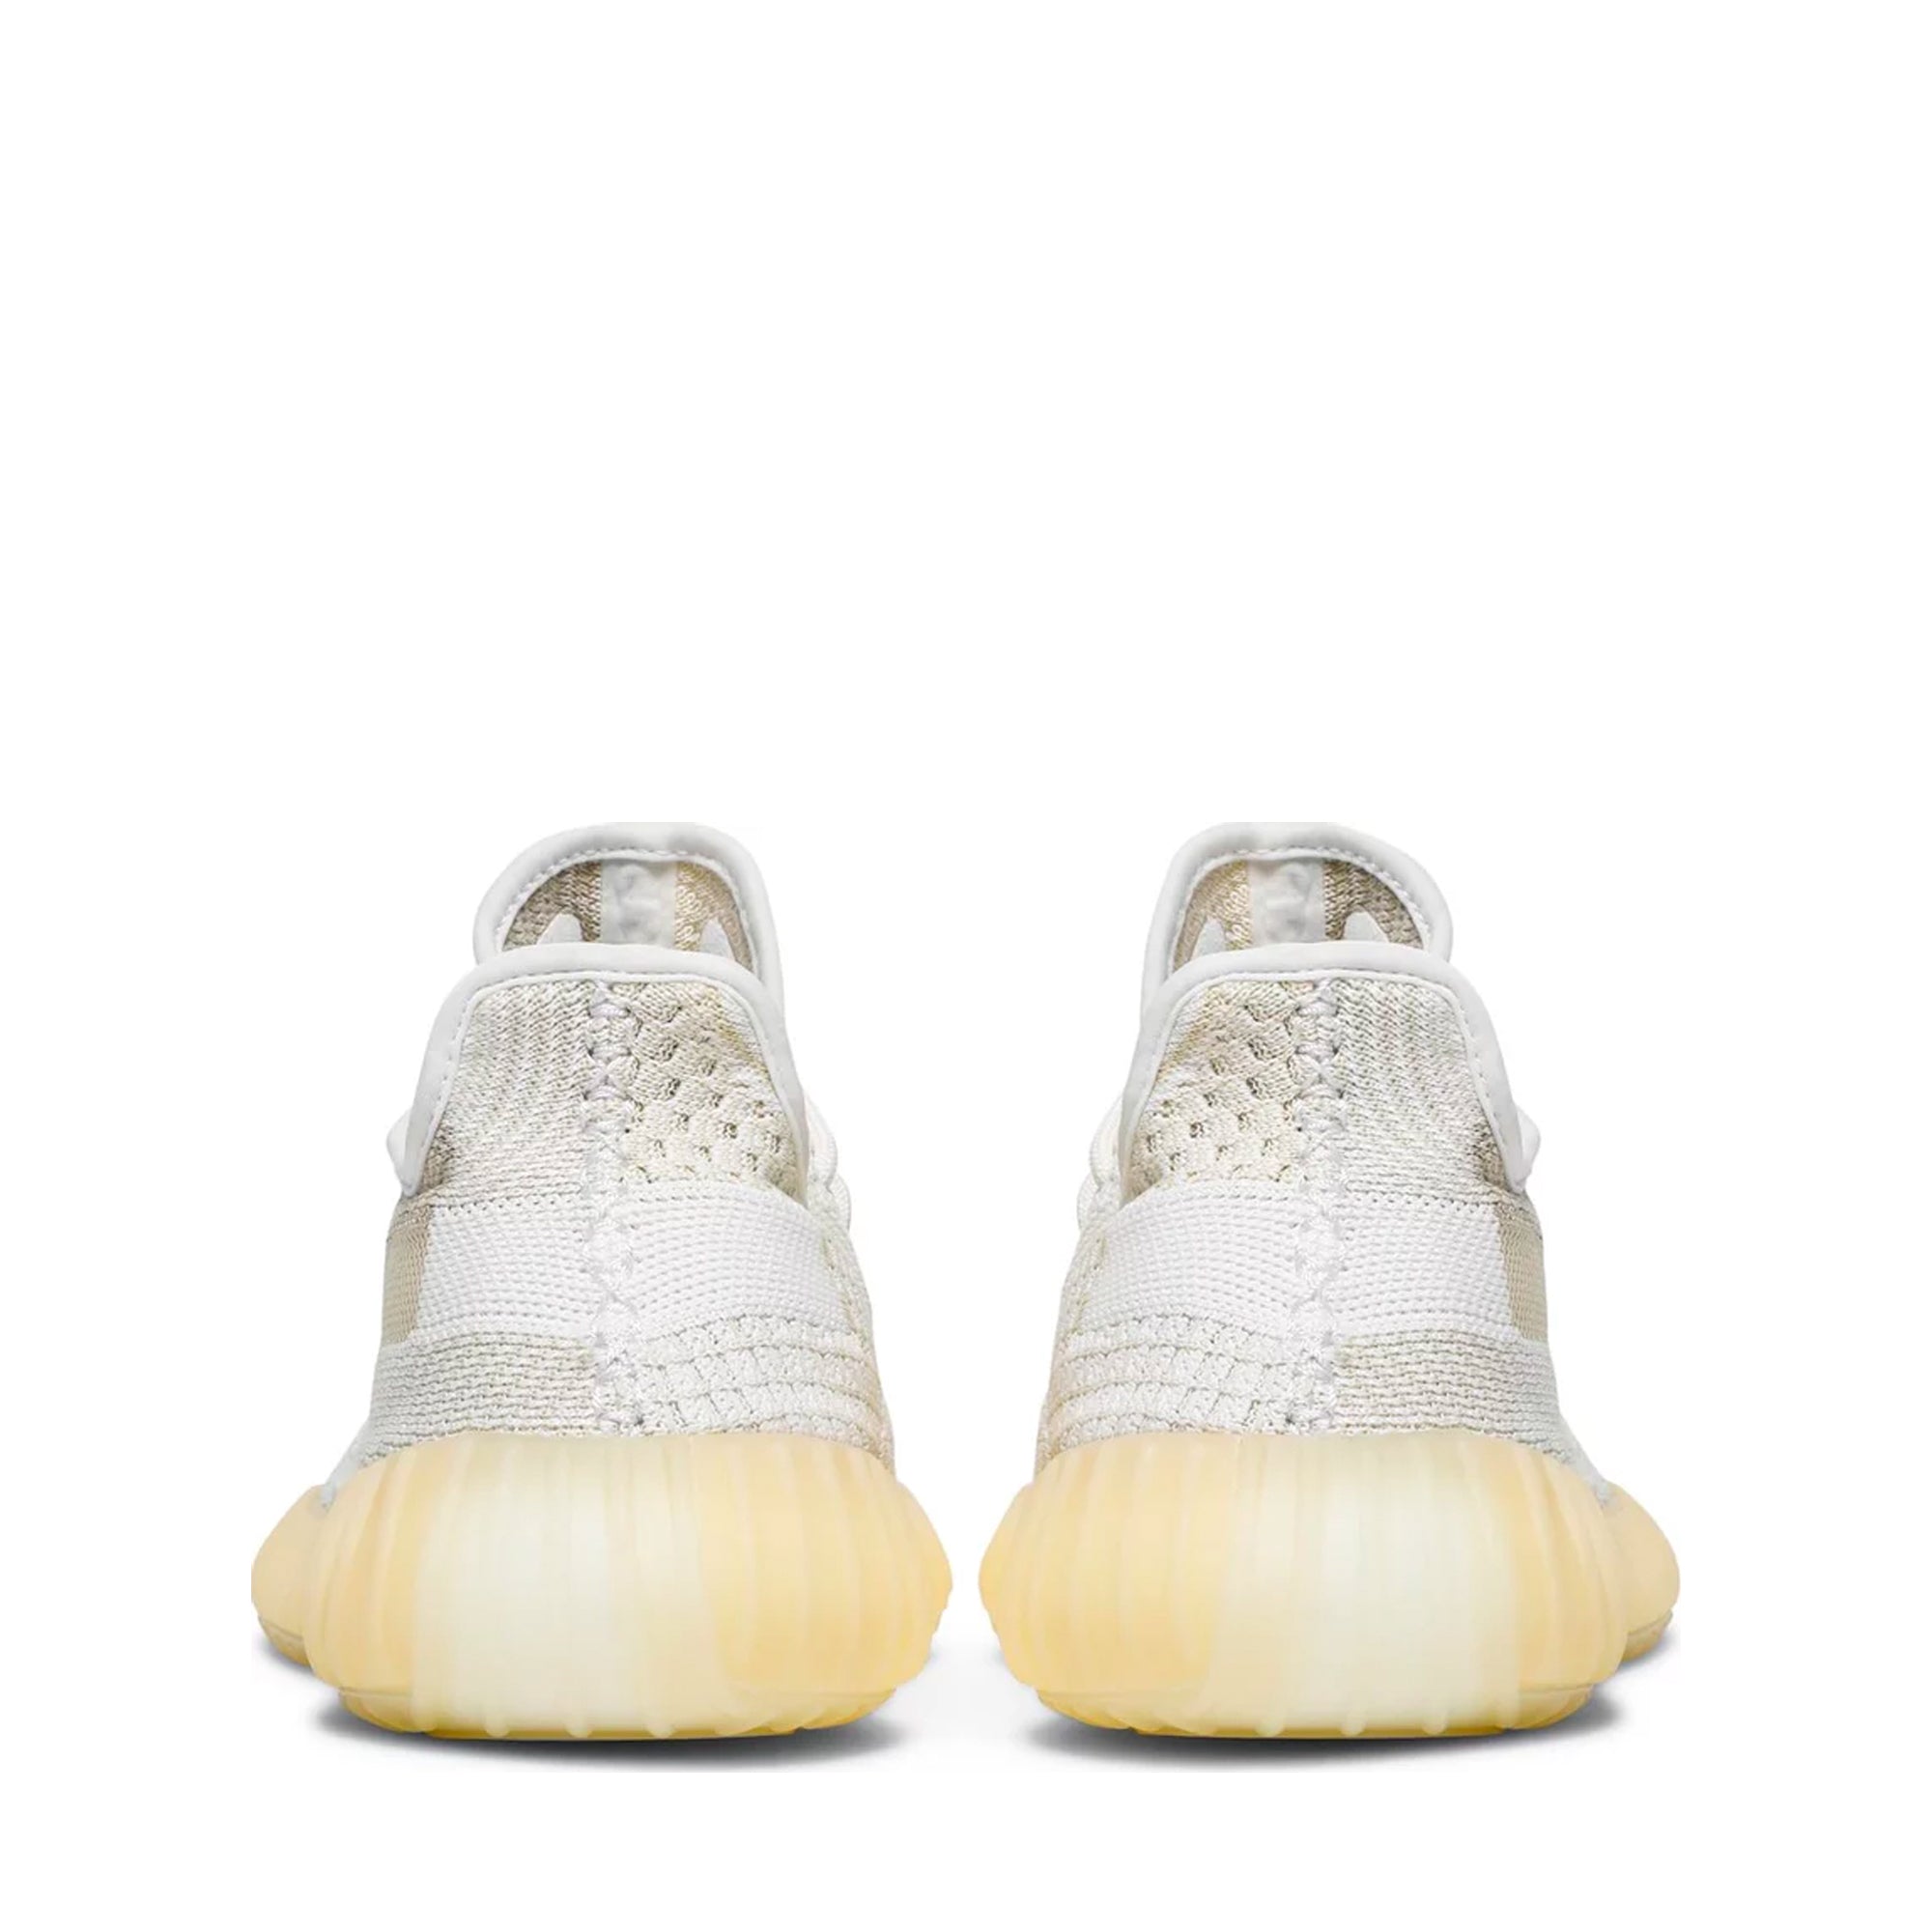 adidas Yeezy Boost 350 V2 Natural-PLUS